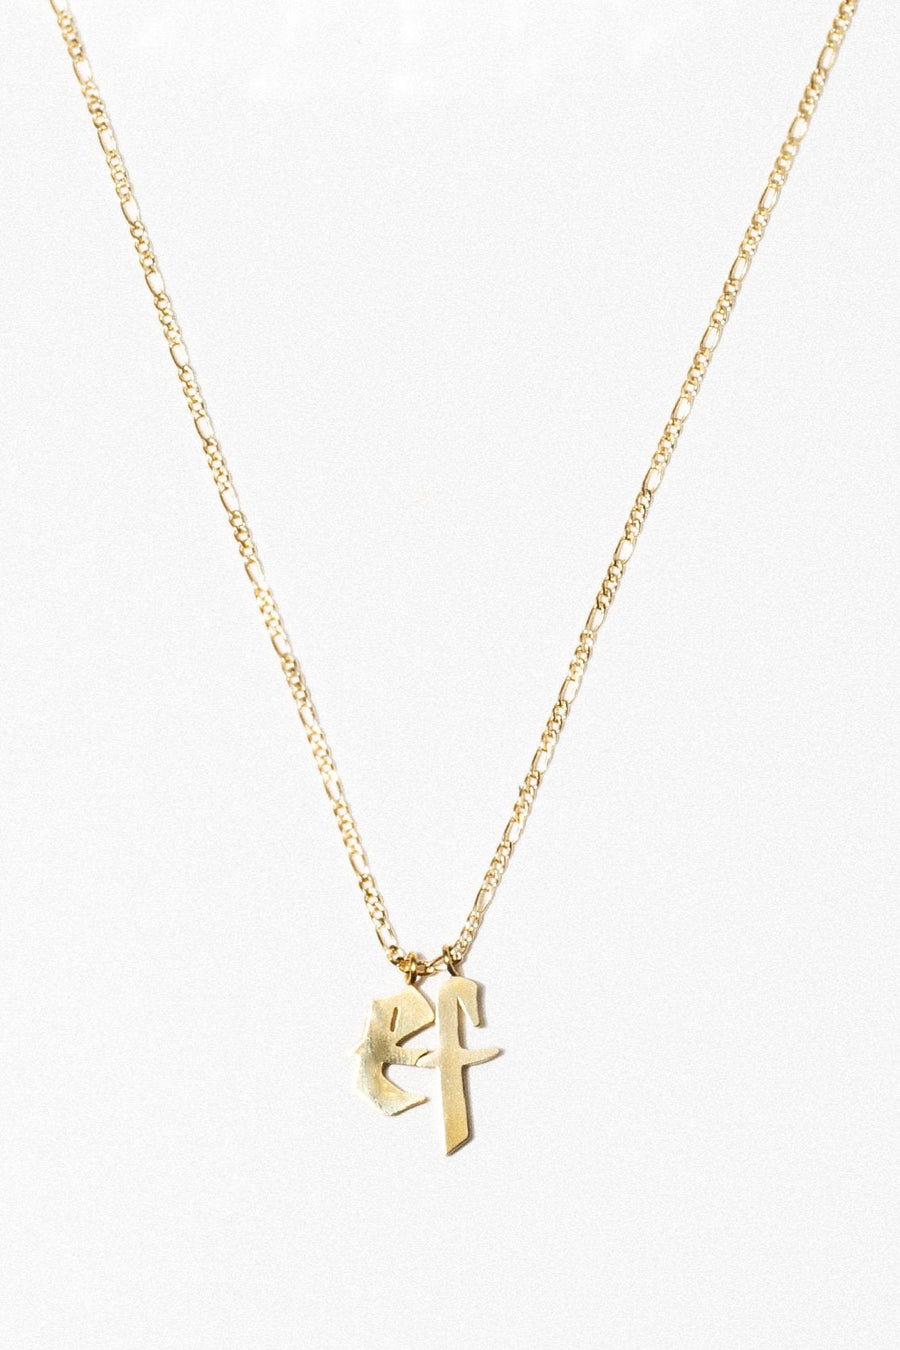 Aimvogue Jewelry 2 letters / Gold / FINAL SALE Namesake Initial Necklace